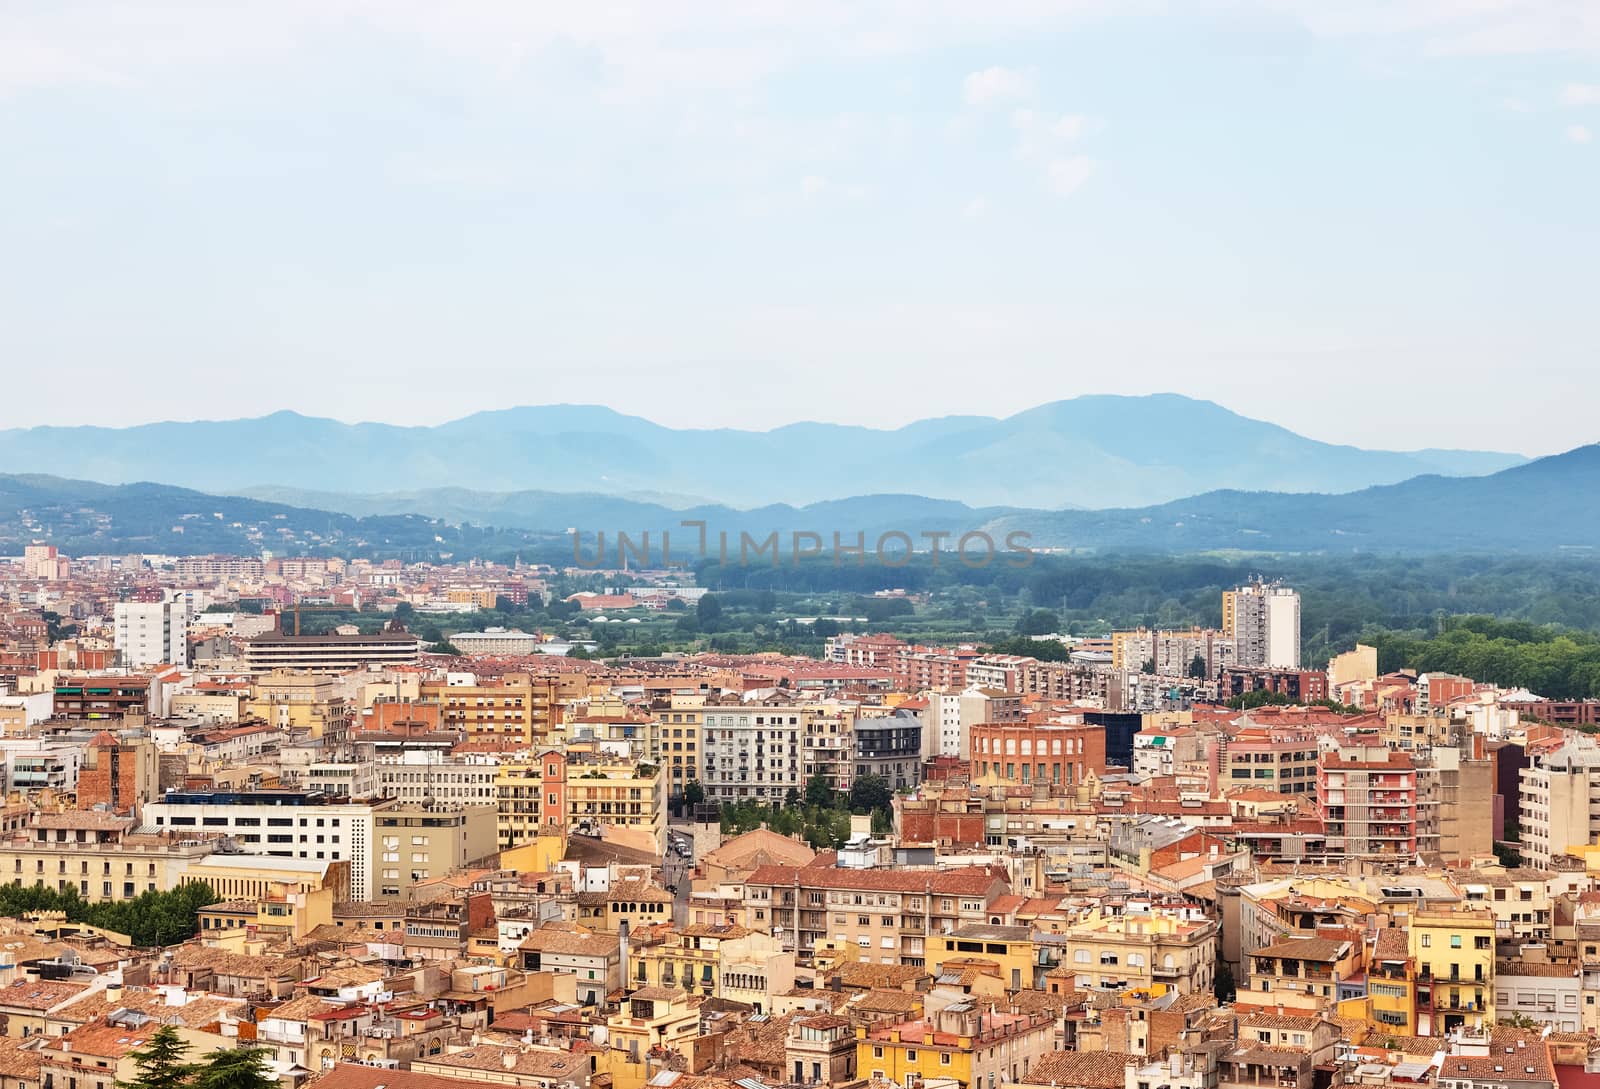 Picturesque city of Girona surrounded by mountains. Catalonia, Spain.